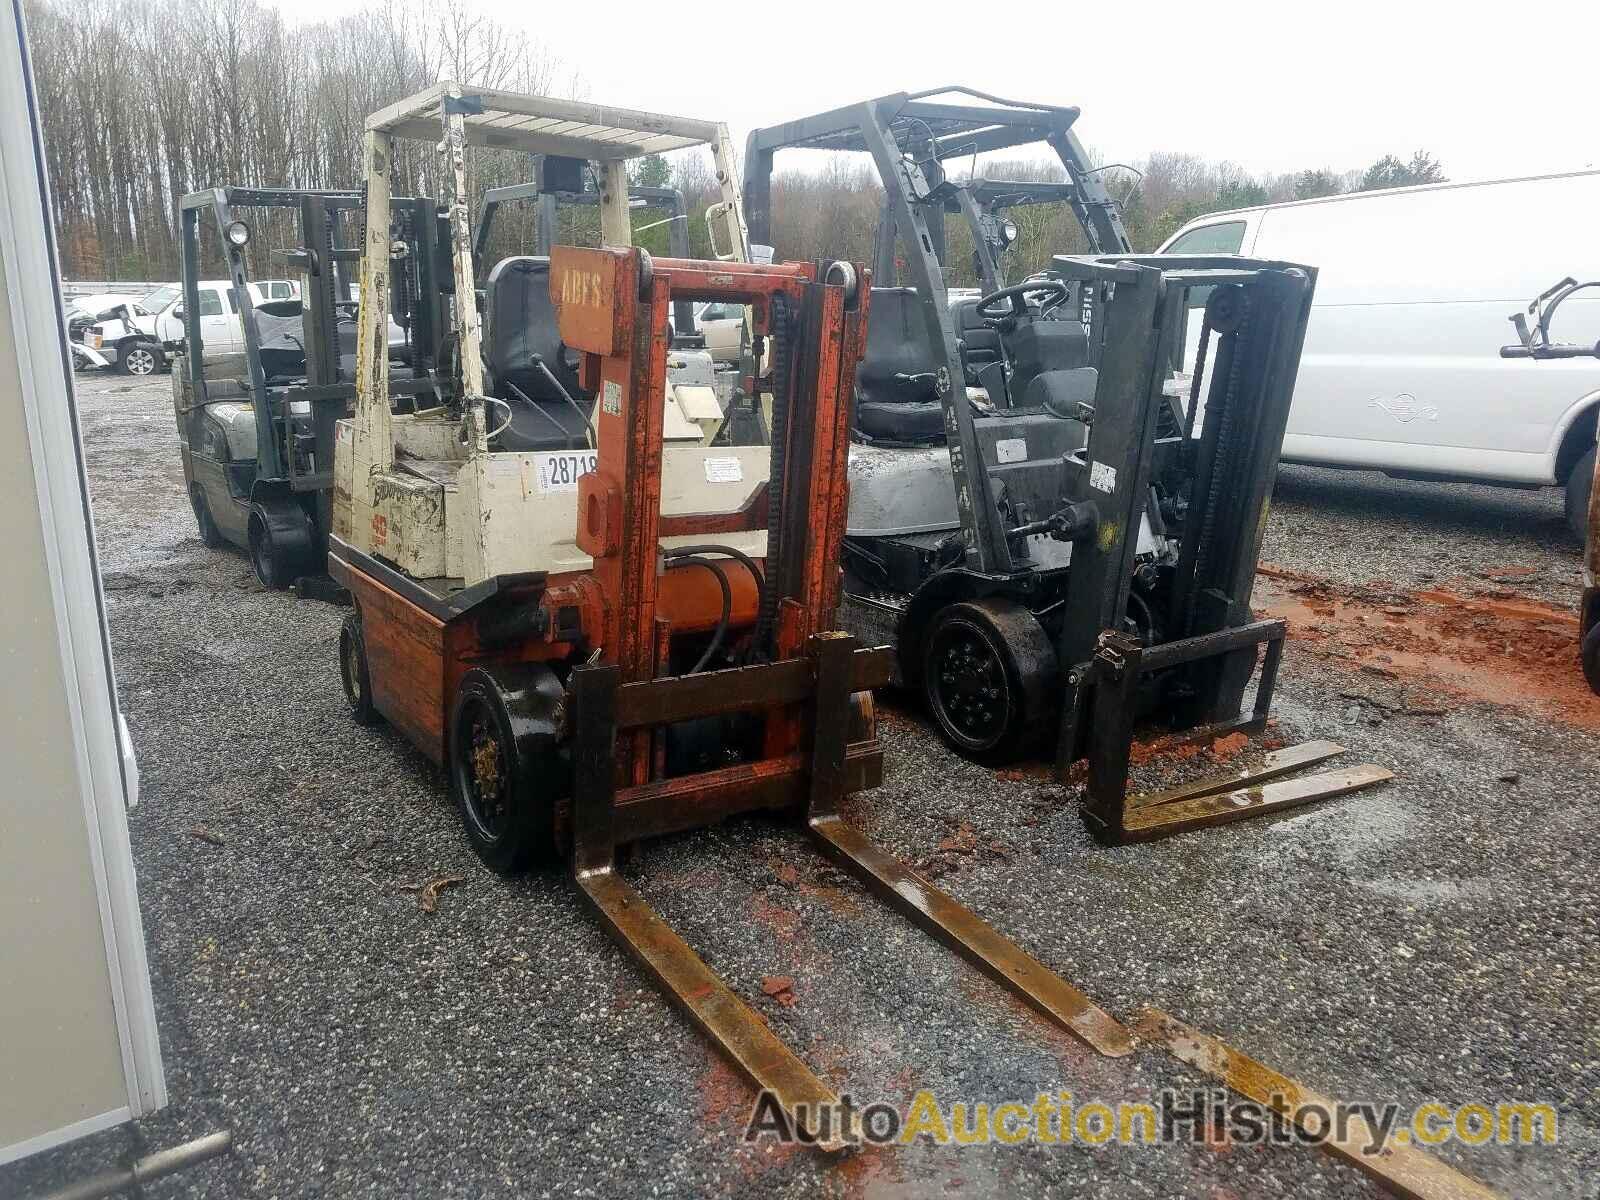 1994 NISSAN FORKLIFT, KCPH02P901803